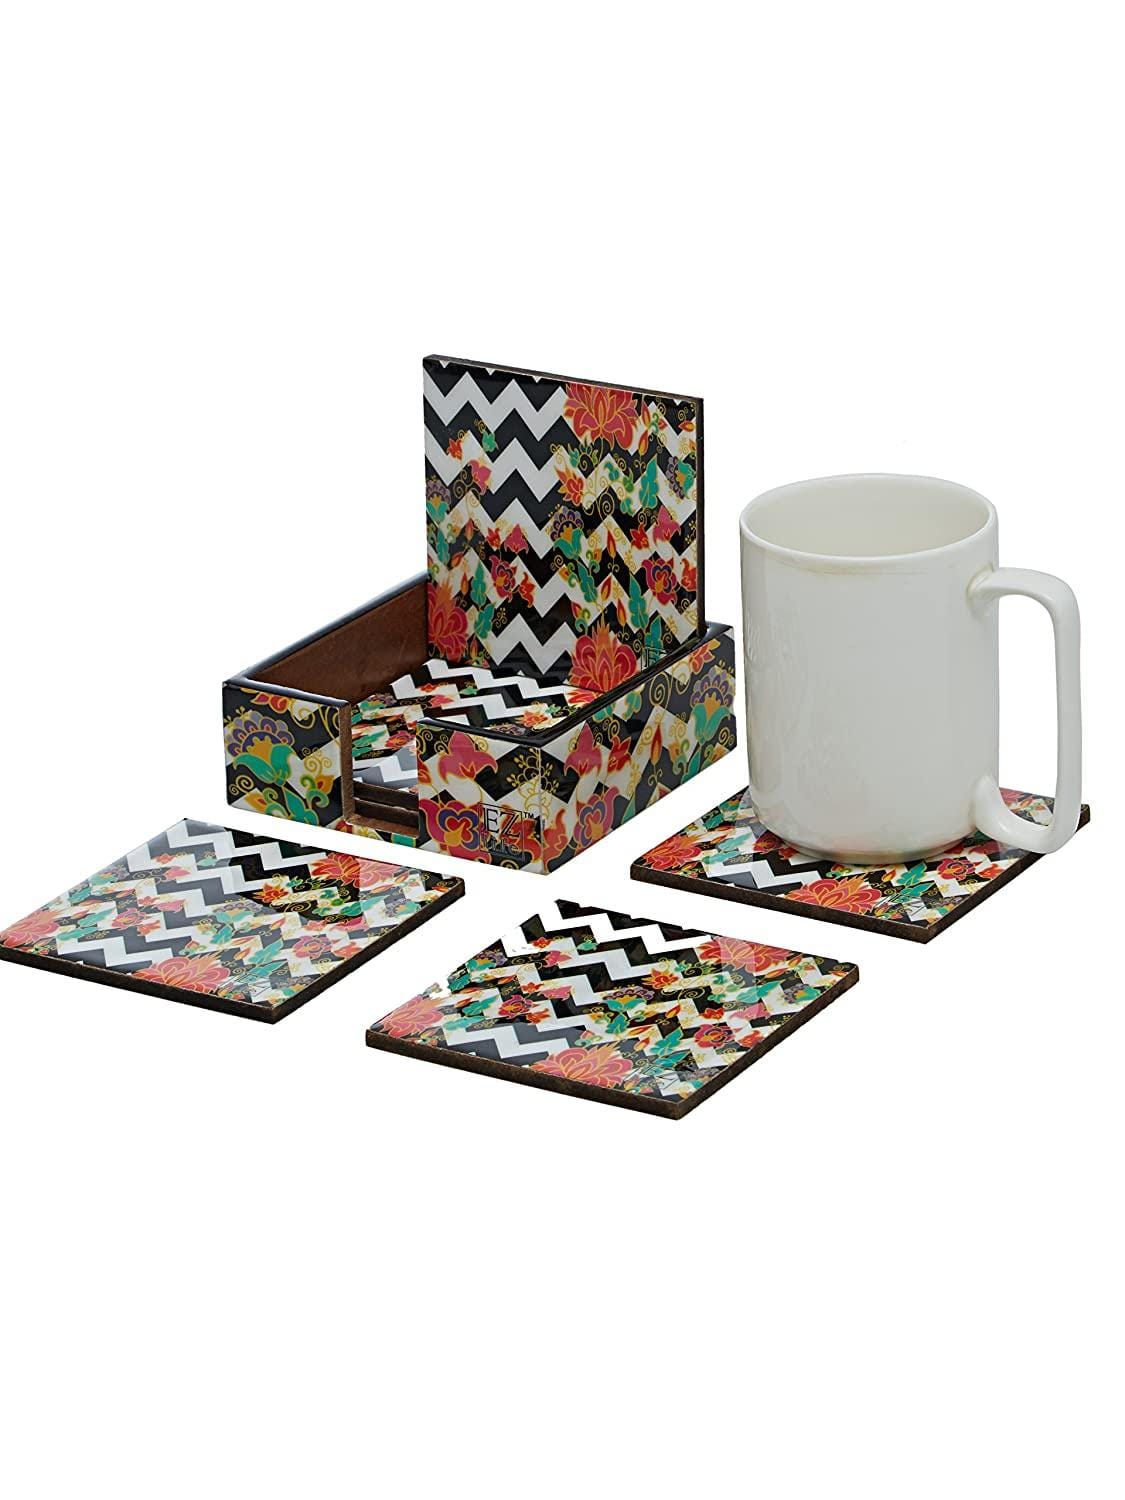 Zig Zag Blossom - 9 Wooden Inch Tray & 6 Wooden Coasters with Holder Set (Blue)